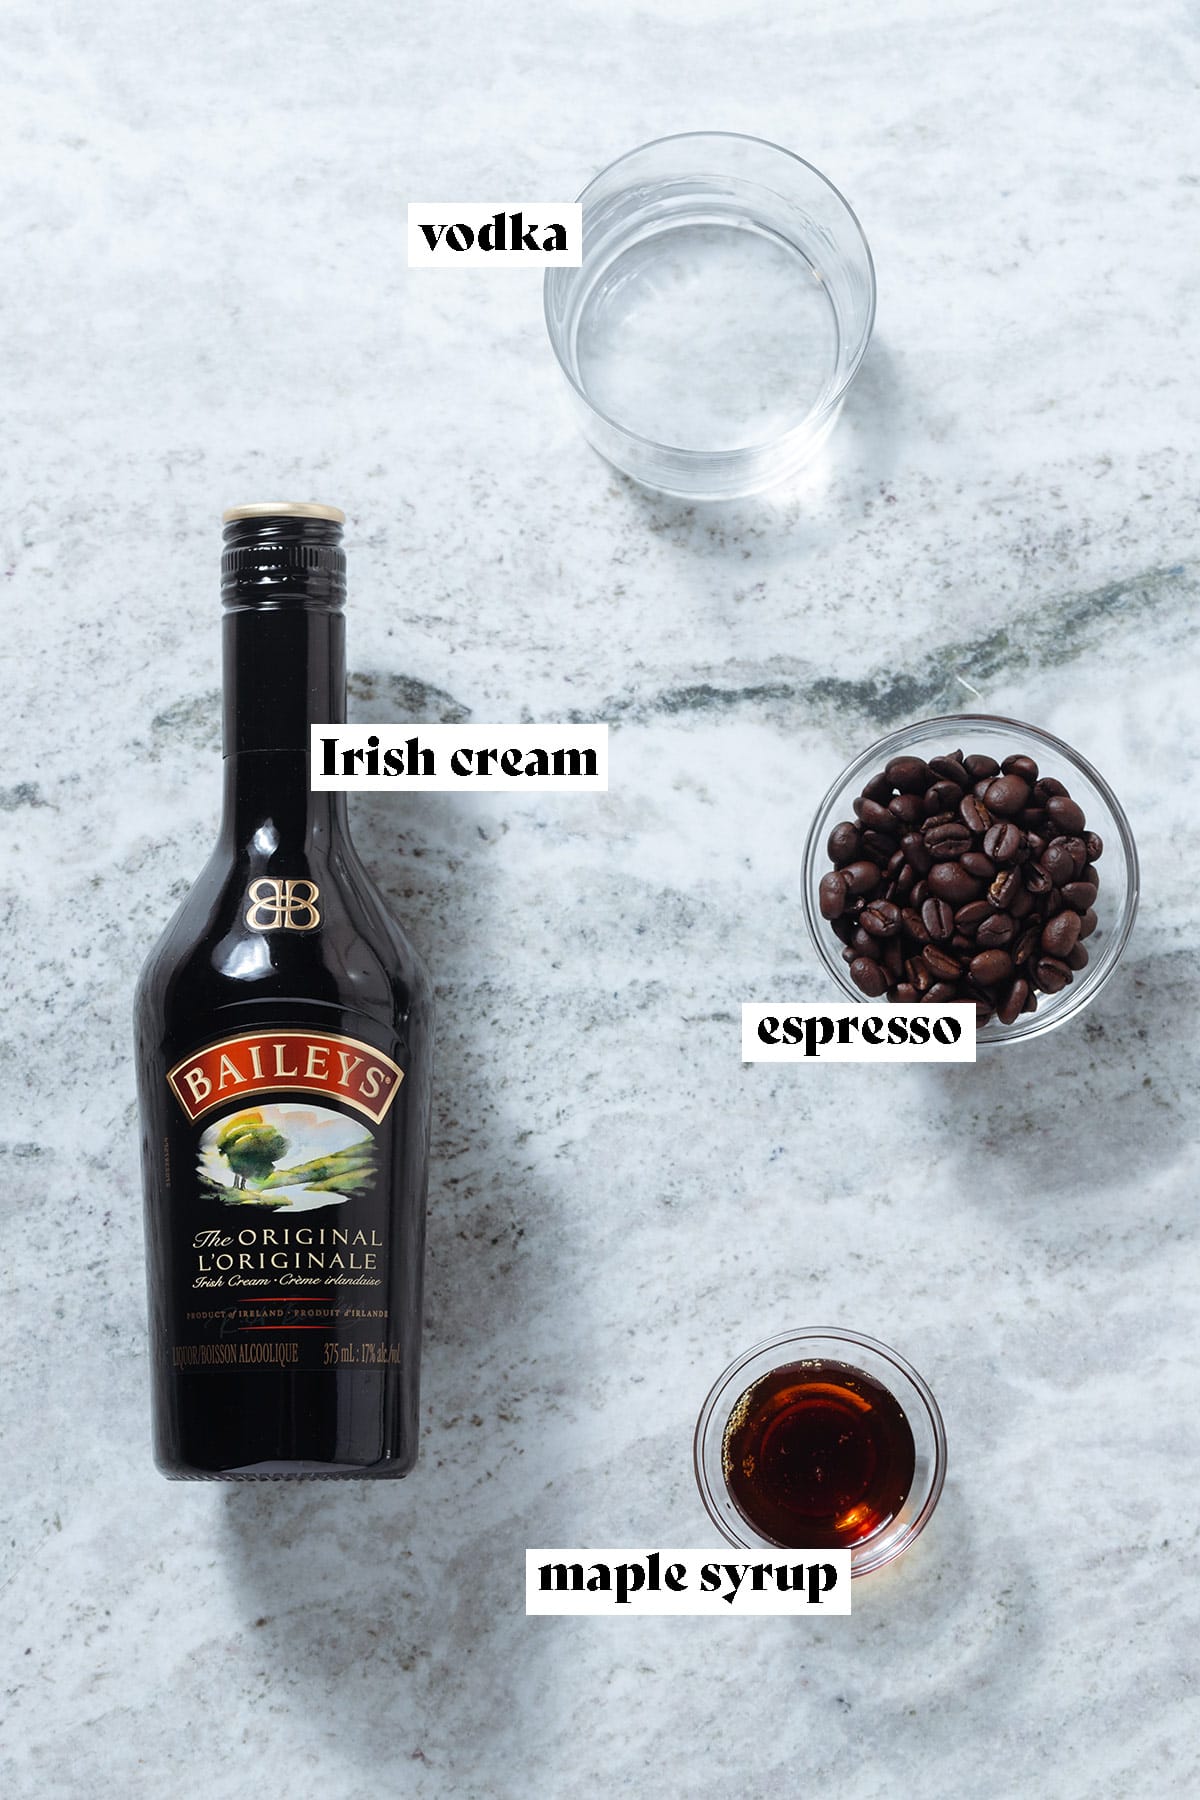 A bottle of Bailey's, maple syrup, vodka, and coffee beans on a grey stone background with text overlay.